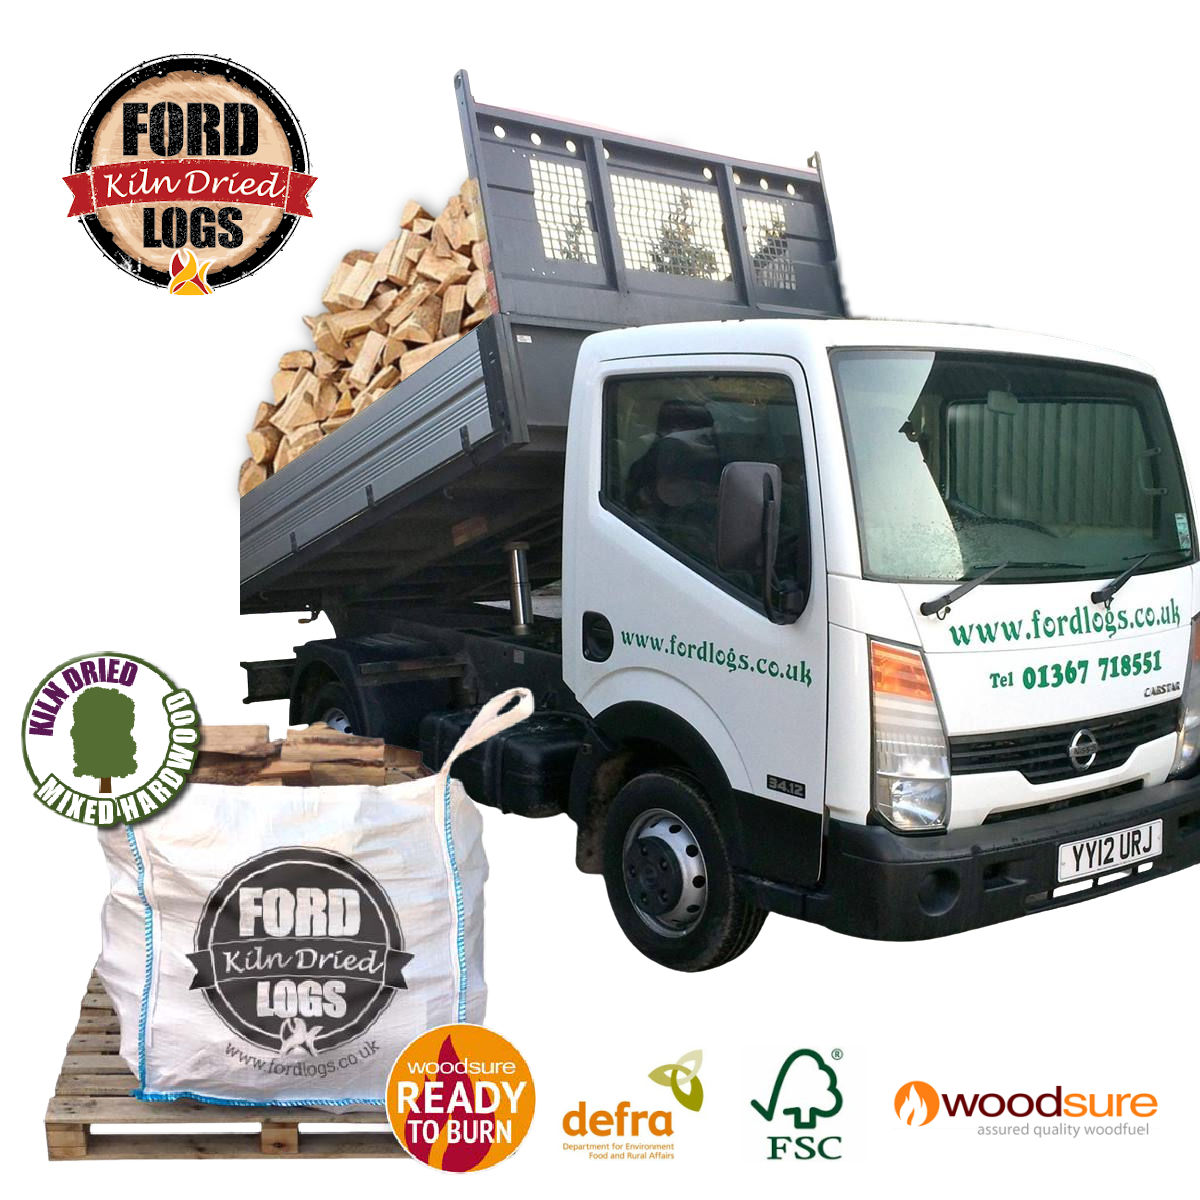 Free LOGS delivery within a 10-mile radius of our yard (Garford nr Abingdon) 🔥
#fordlogs #deliverylogs #kilndriedlogs #freedelivery